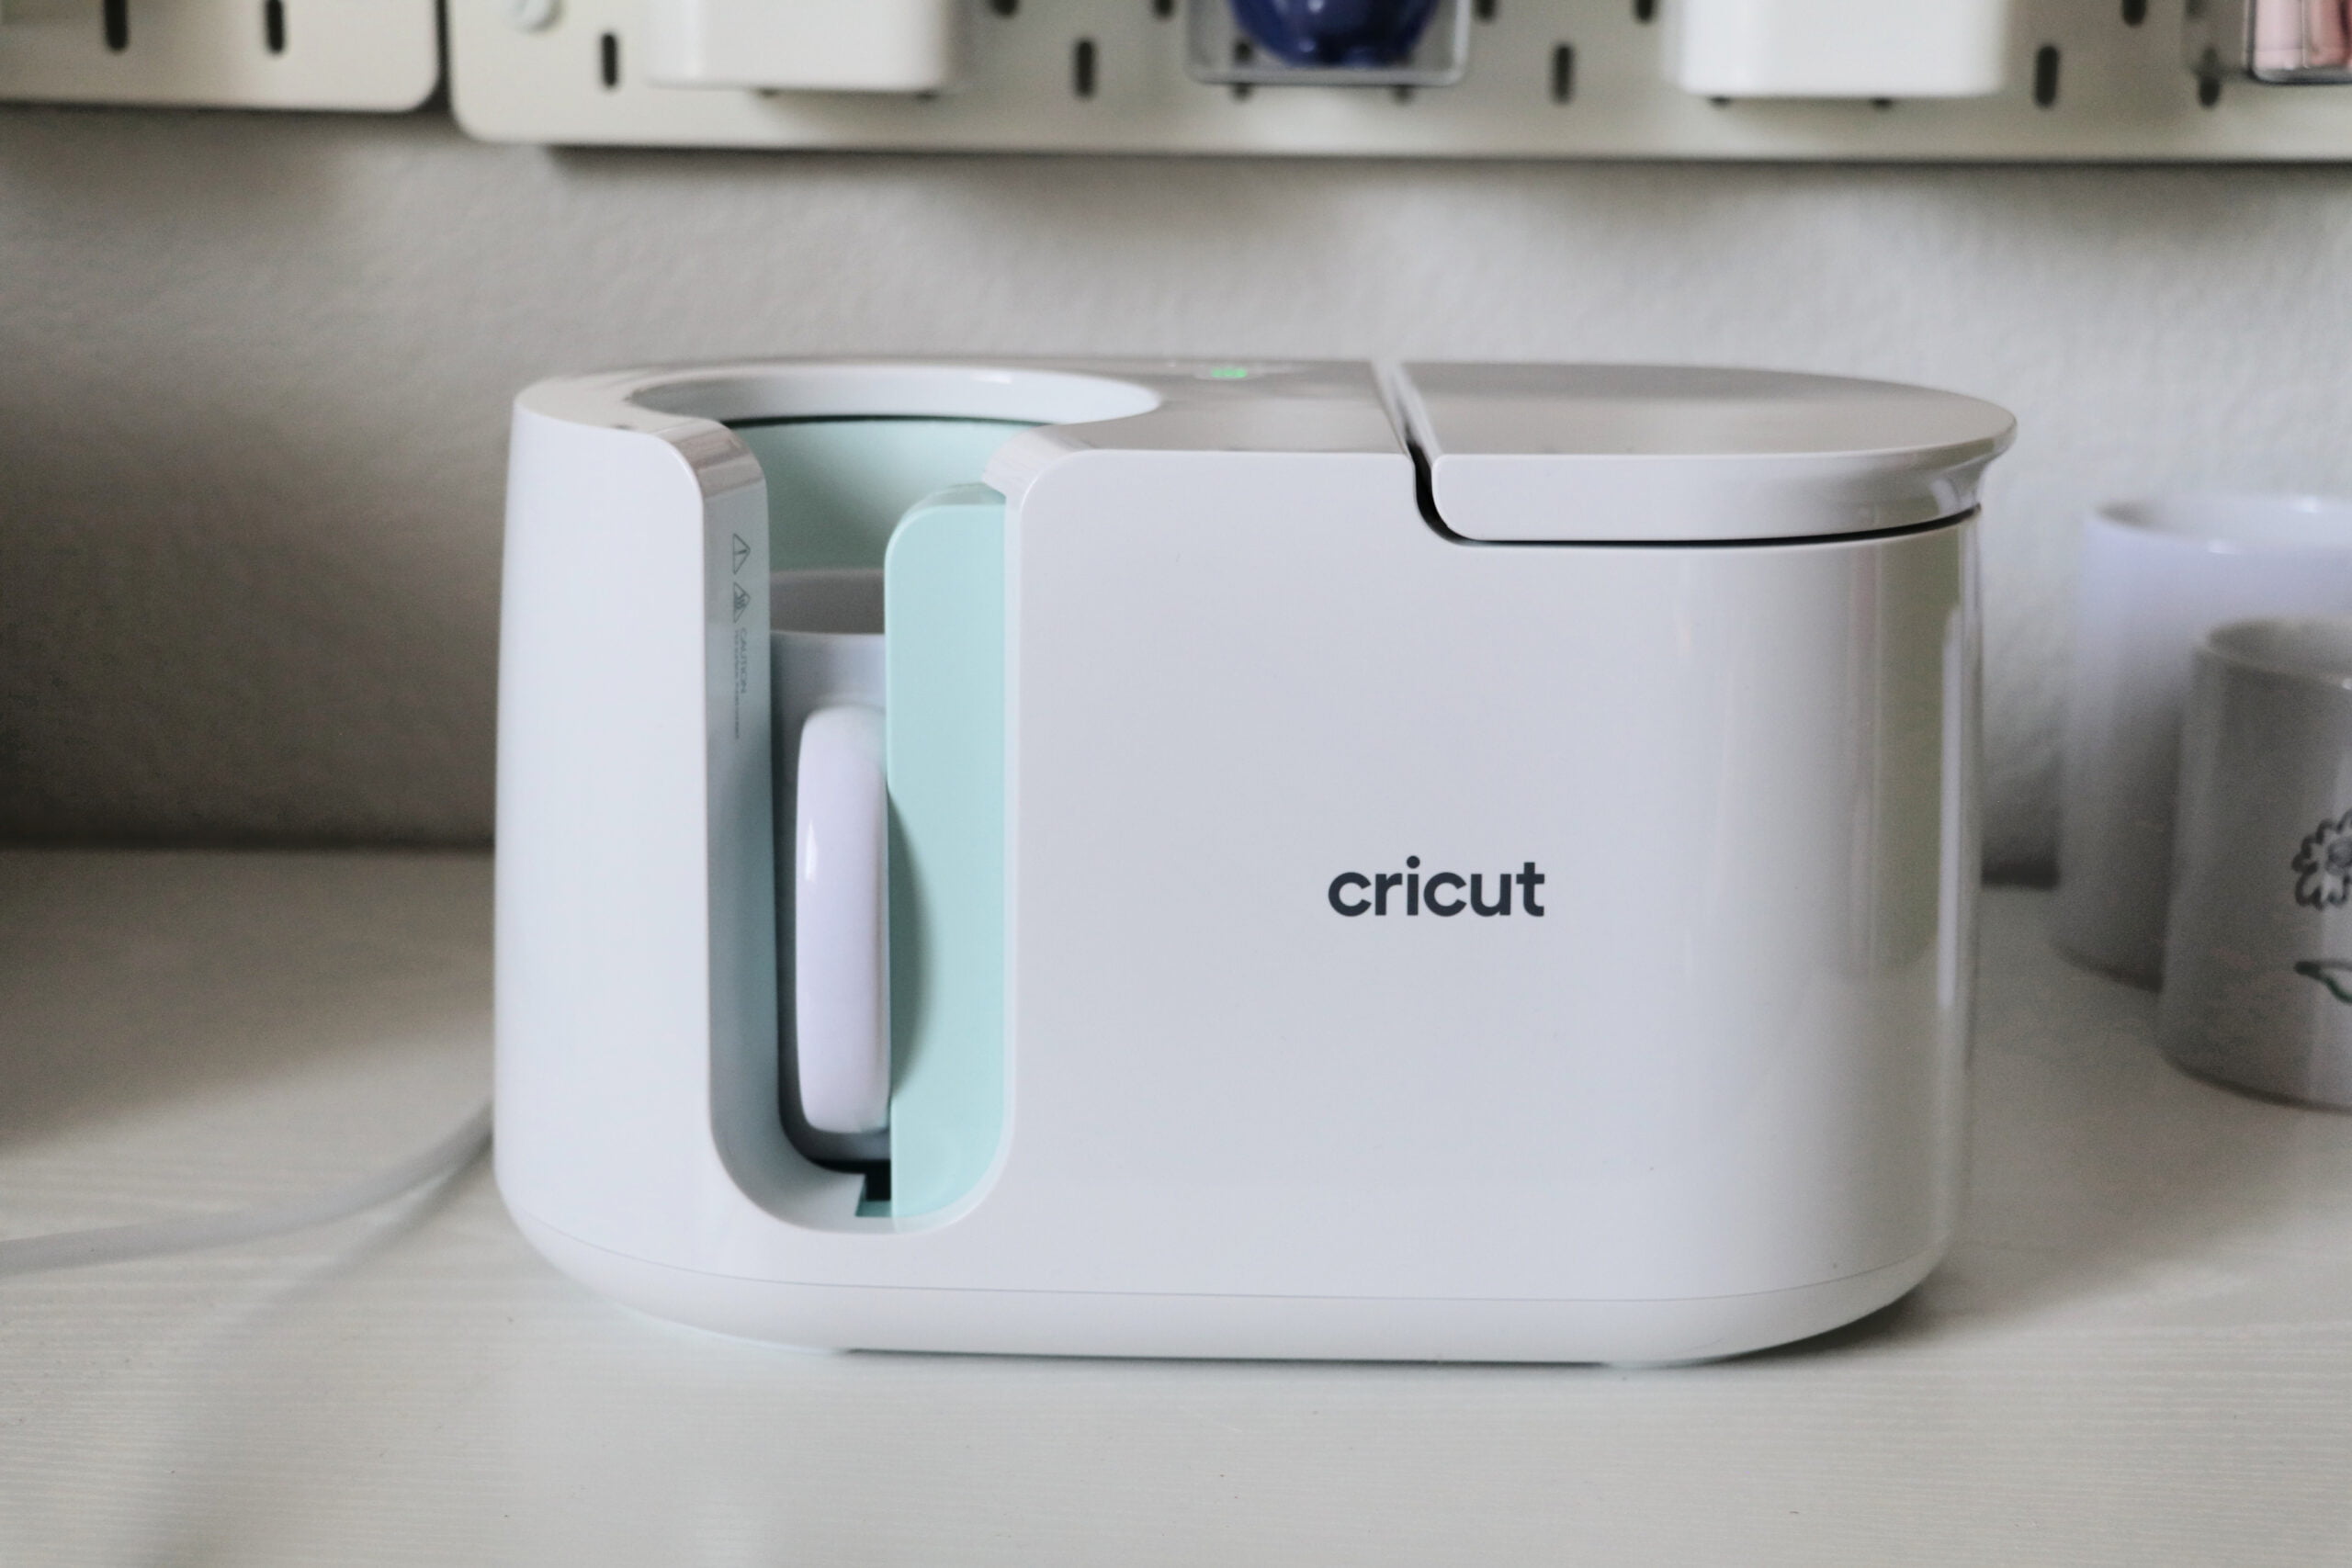 Answers to The Top Cricut Mug Press Questions ⋆ The Quiet Grove